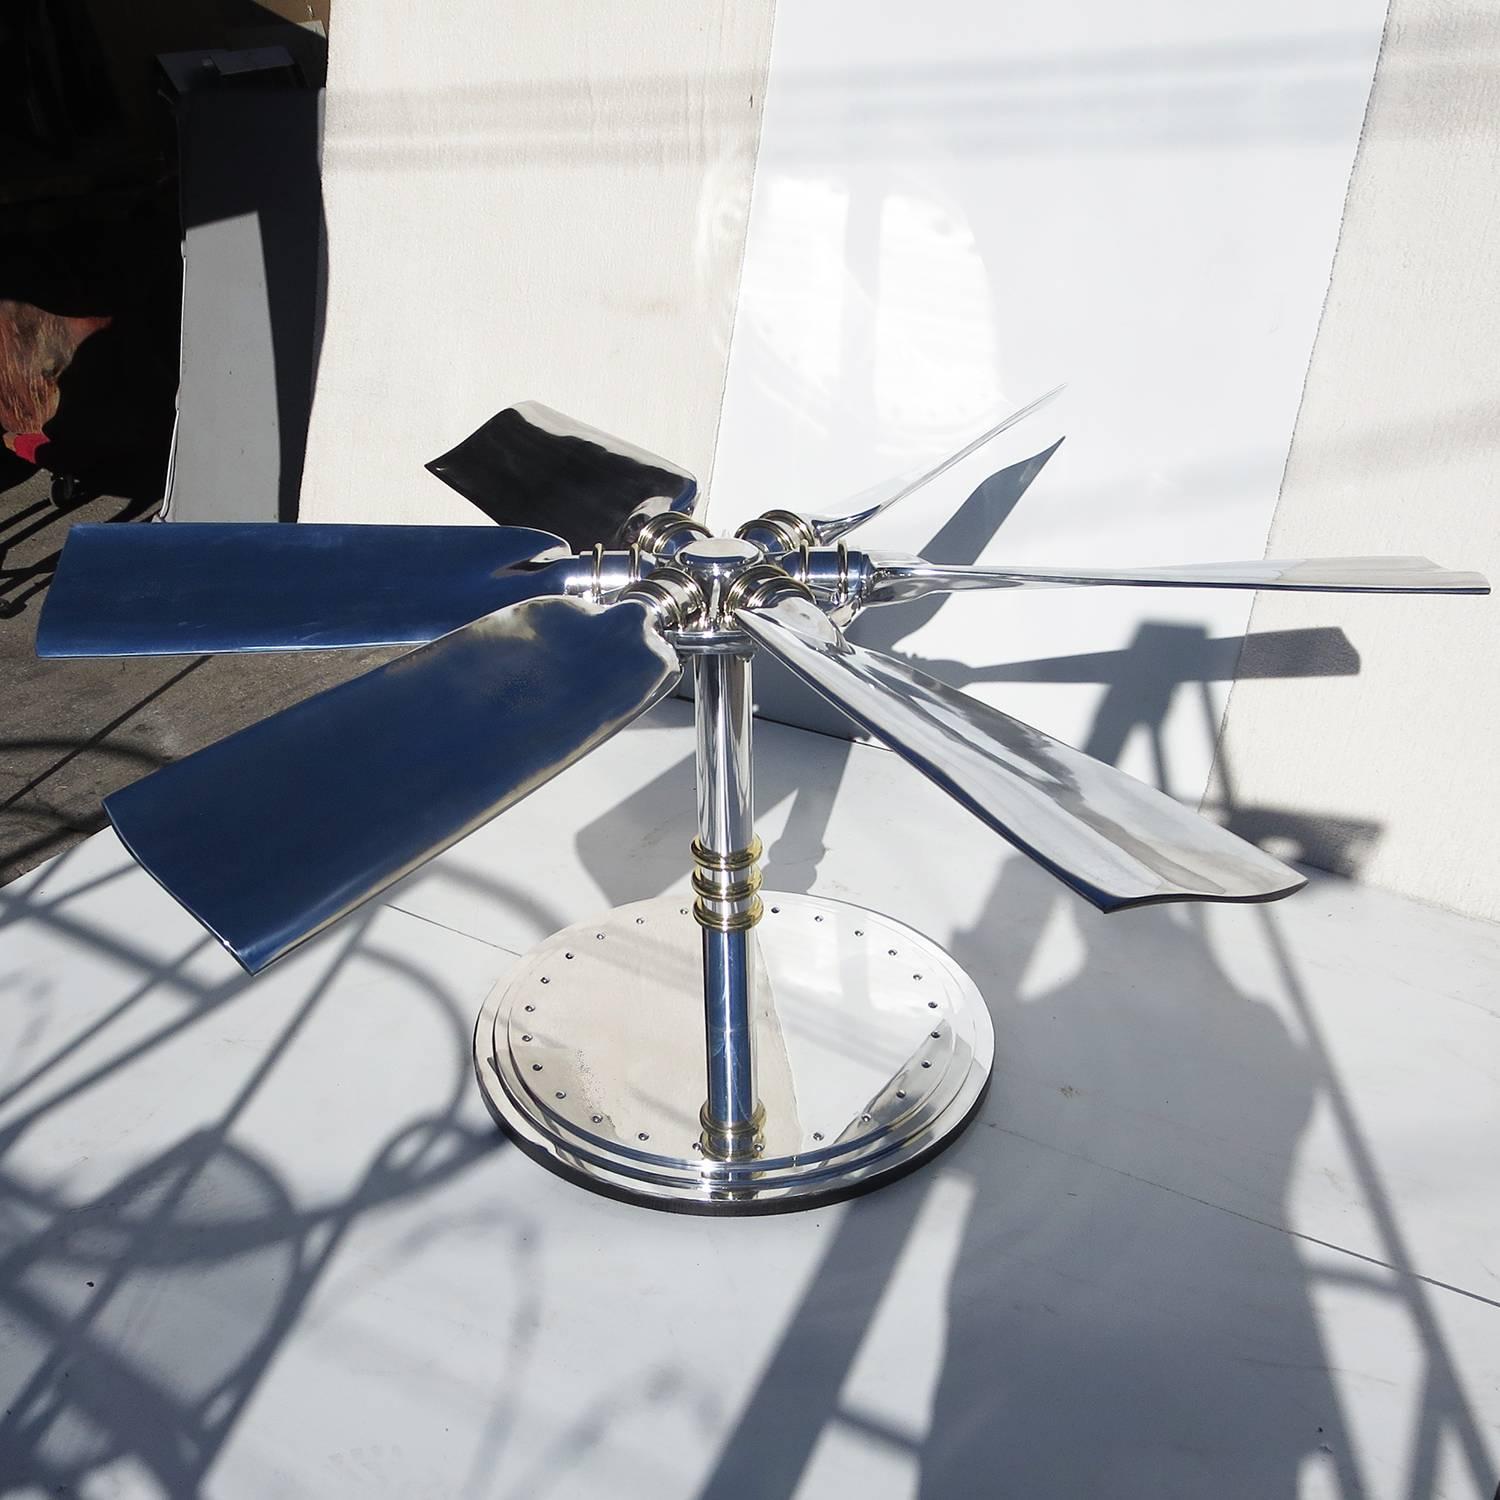 A six bladed propeller was the genesis of this incredible table. We designed and created the base of highly polished aluminum, with brass accents. The propeller blades are 